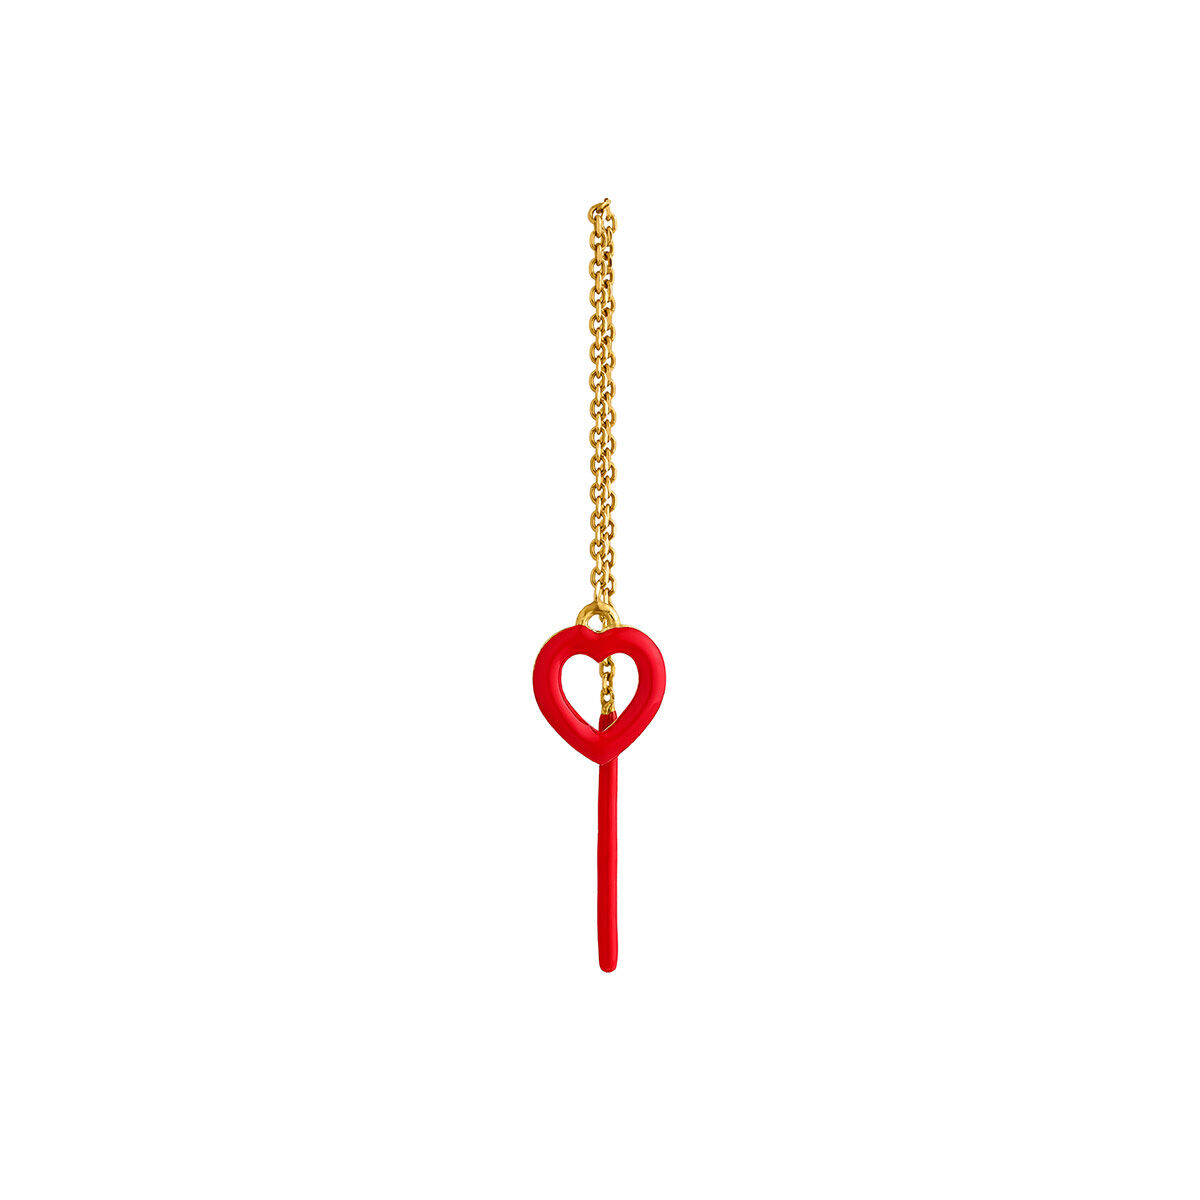 Long single chain earring in yellow gold-plated silver with a heart and red enamel, J05160-02-ROJENA-H, hi-res